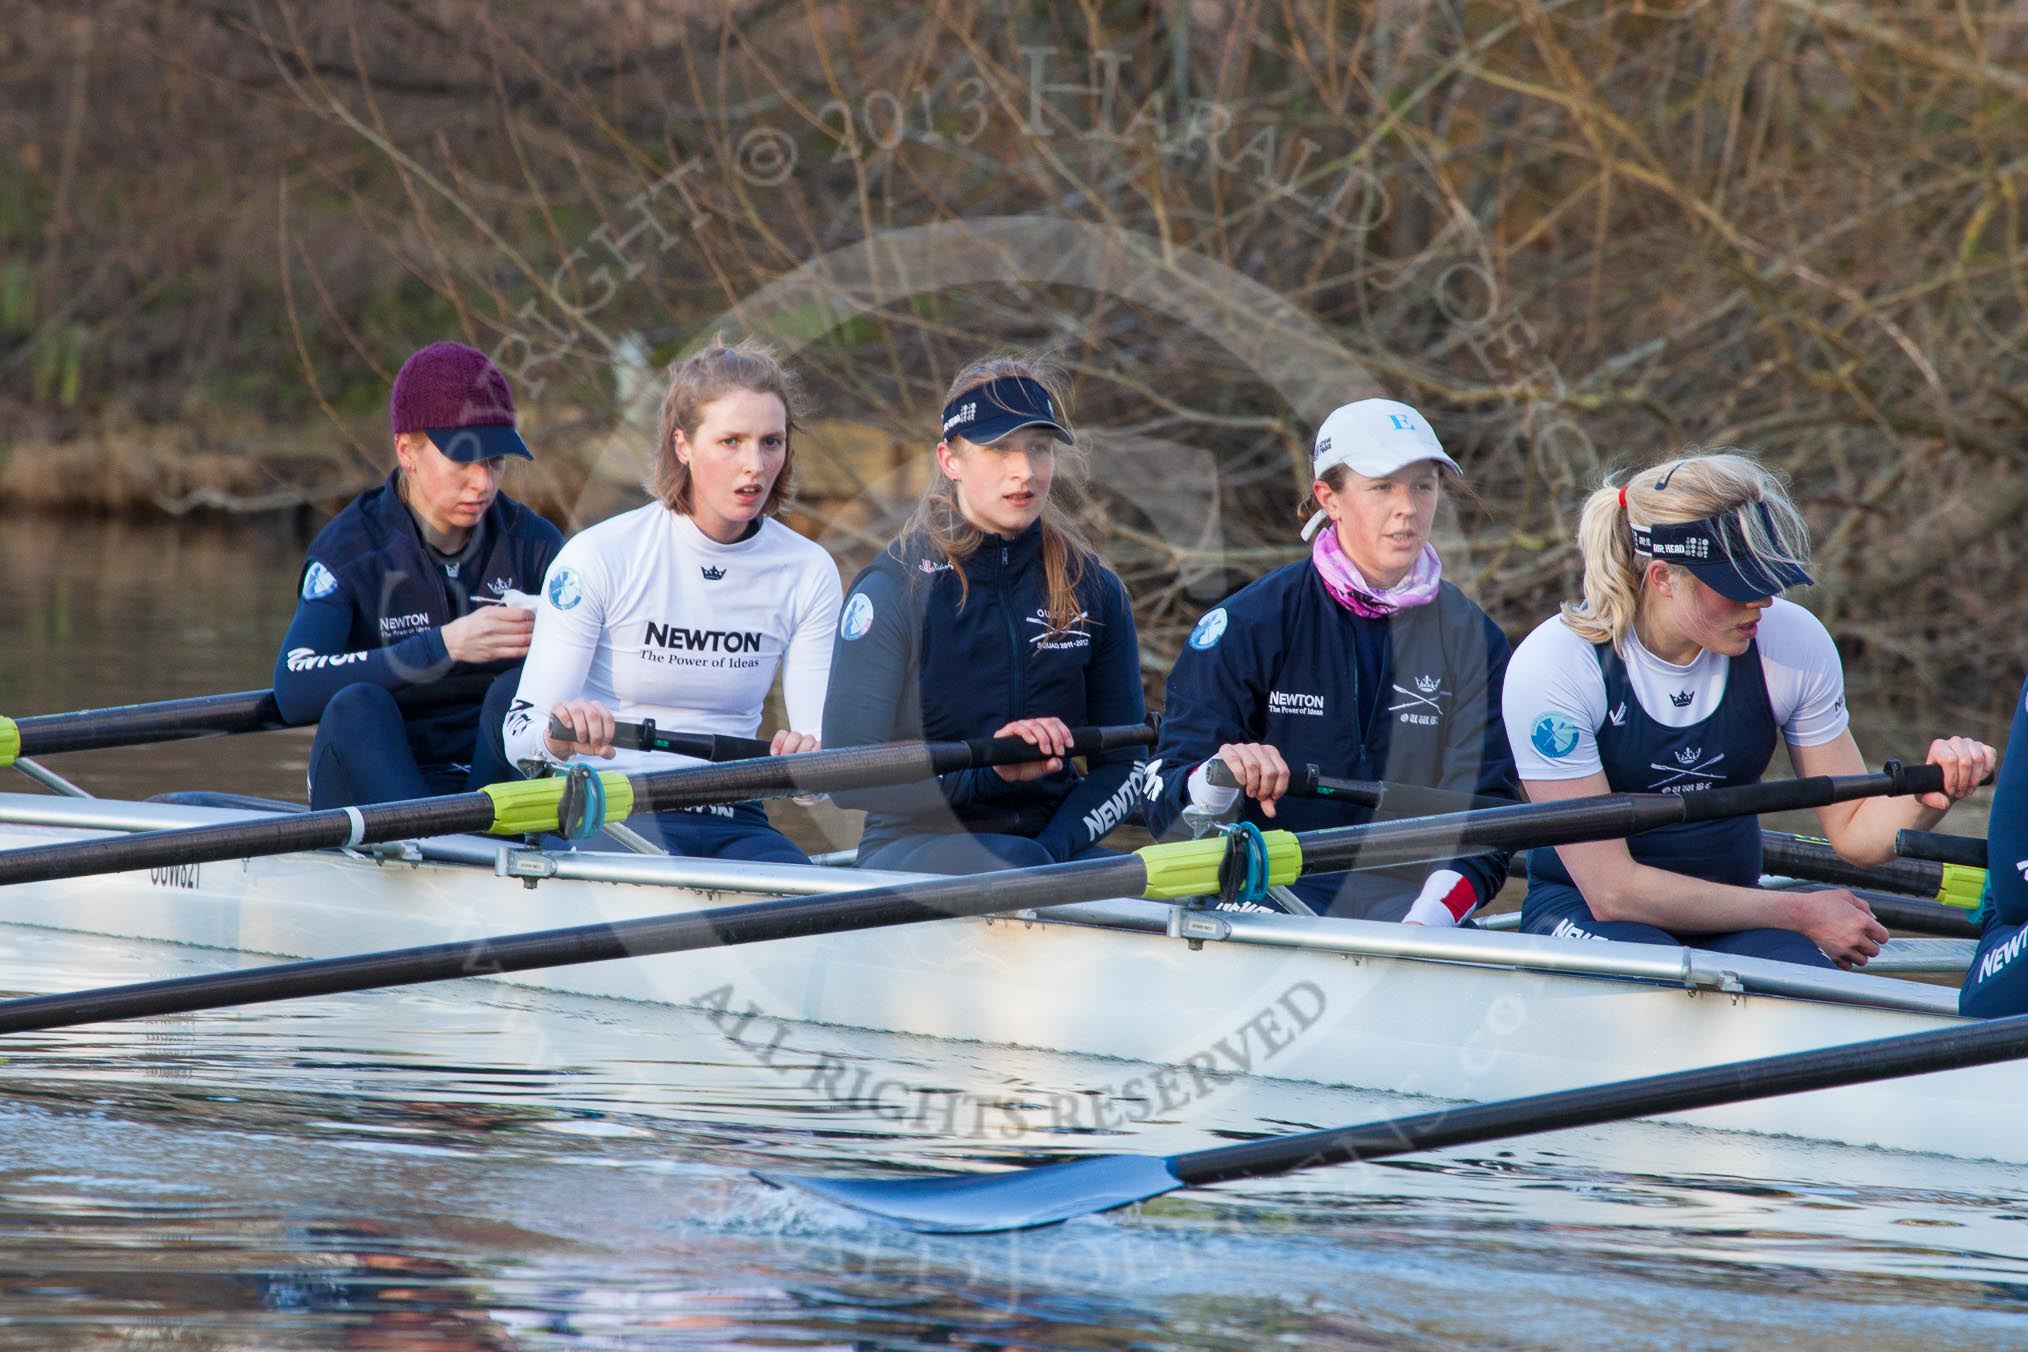 The Boat Race season 2013 - OUWBC training: In the OUWBC Blue Boat bow Mariann Novak, Alice Carrington-Windo, Mary Foord-Weston, Jo Lee, and 5 seat Amy Varney..
River Thames,
Wallingford,
Oxfordshire,
United Kingdom,
on 13 March 2013 at 17:16, image #124